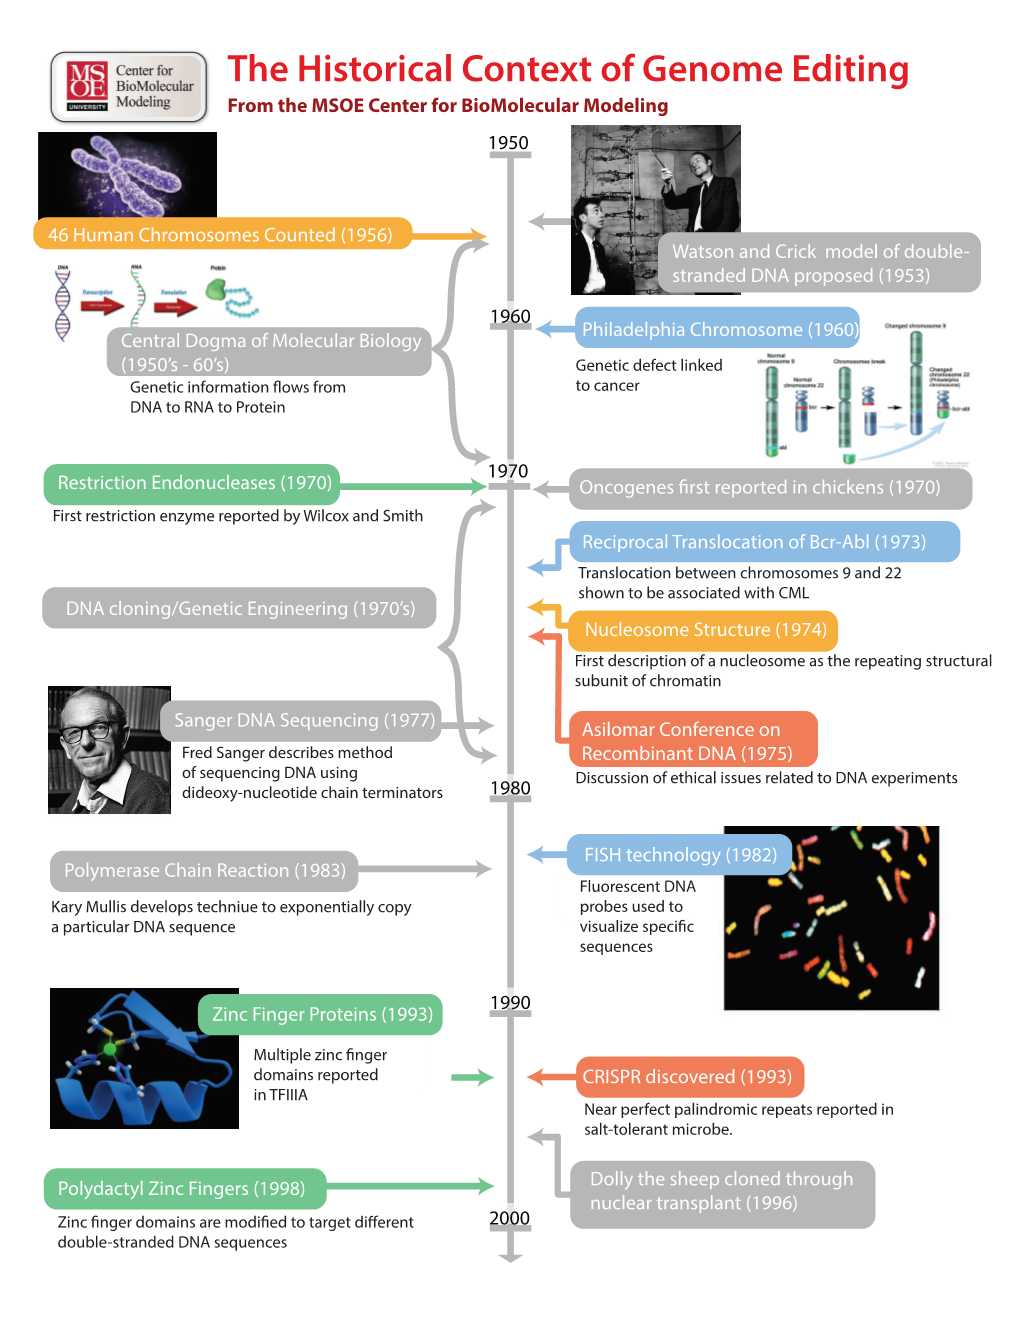 The Historical Context of Genome Editing from the MSOE Center for Biomolecular Modeling 1950